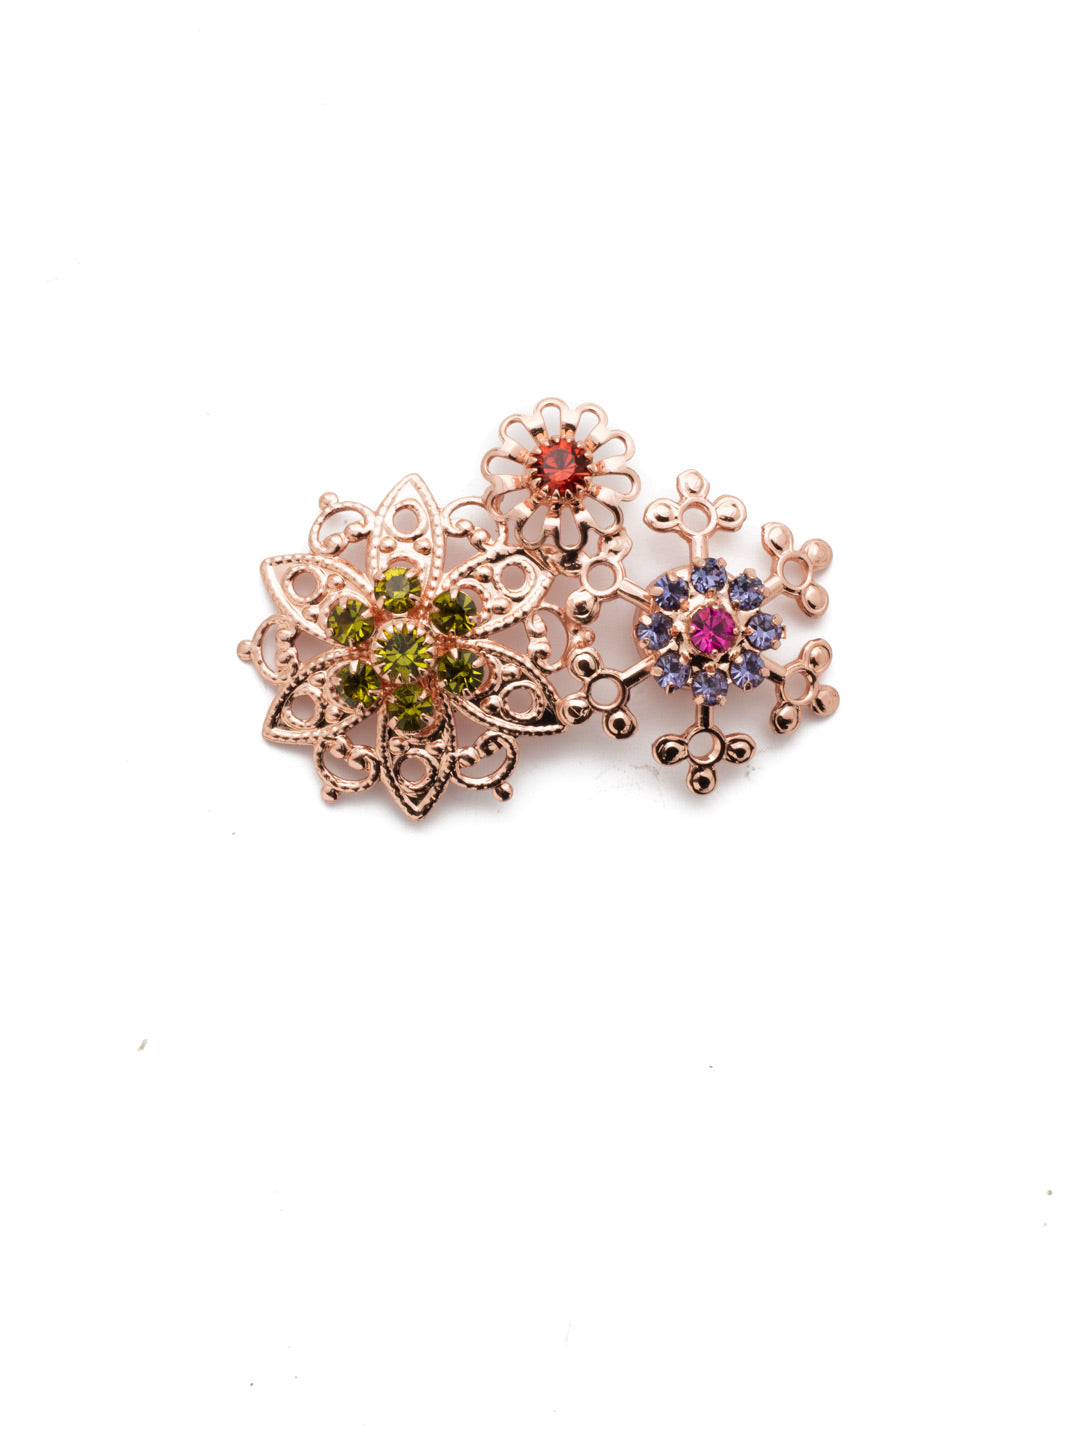 Gloria Magnetic Charm - CHM4RGMUL - <p>Designed with ornate filagree detail and a colorful array of crystals. This multi-functional accessory charm embellishment can be used to decorate, your bag, blazer, dress or refrigerator. Securely fastening with a magnet, leaving no pin holes or damage to fabric. Promptly remove charm embellishment from clothing, bag or accessory before washing. From Sorrelli's Multi  collection in our Rose Gold-tone finish.</p>